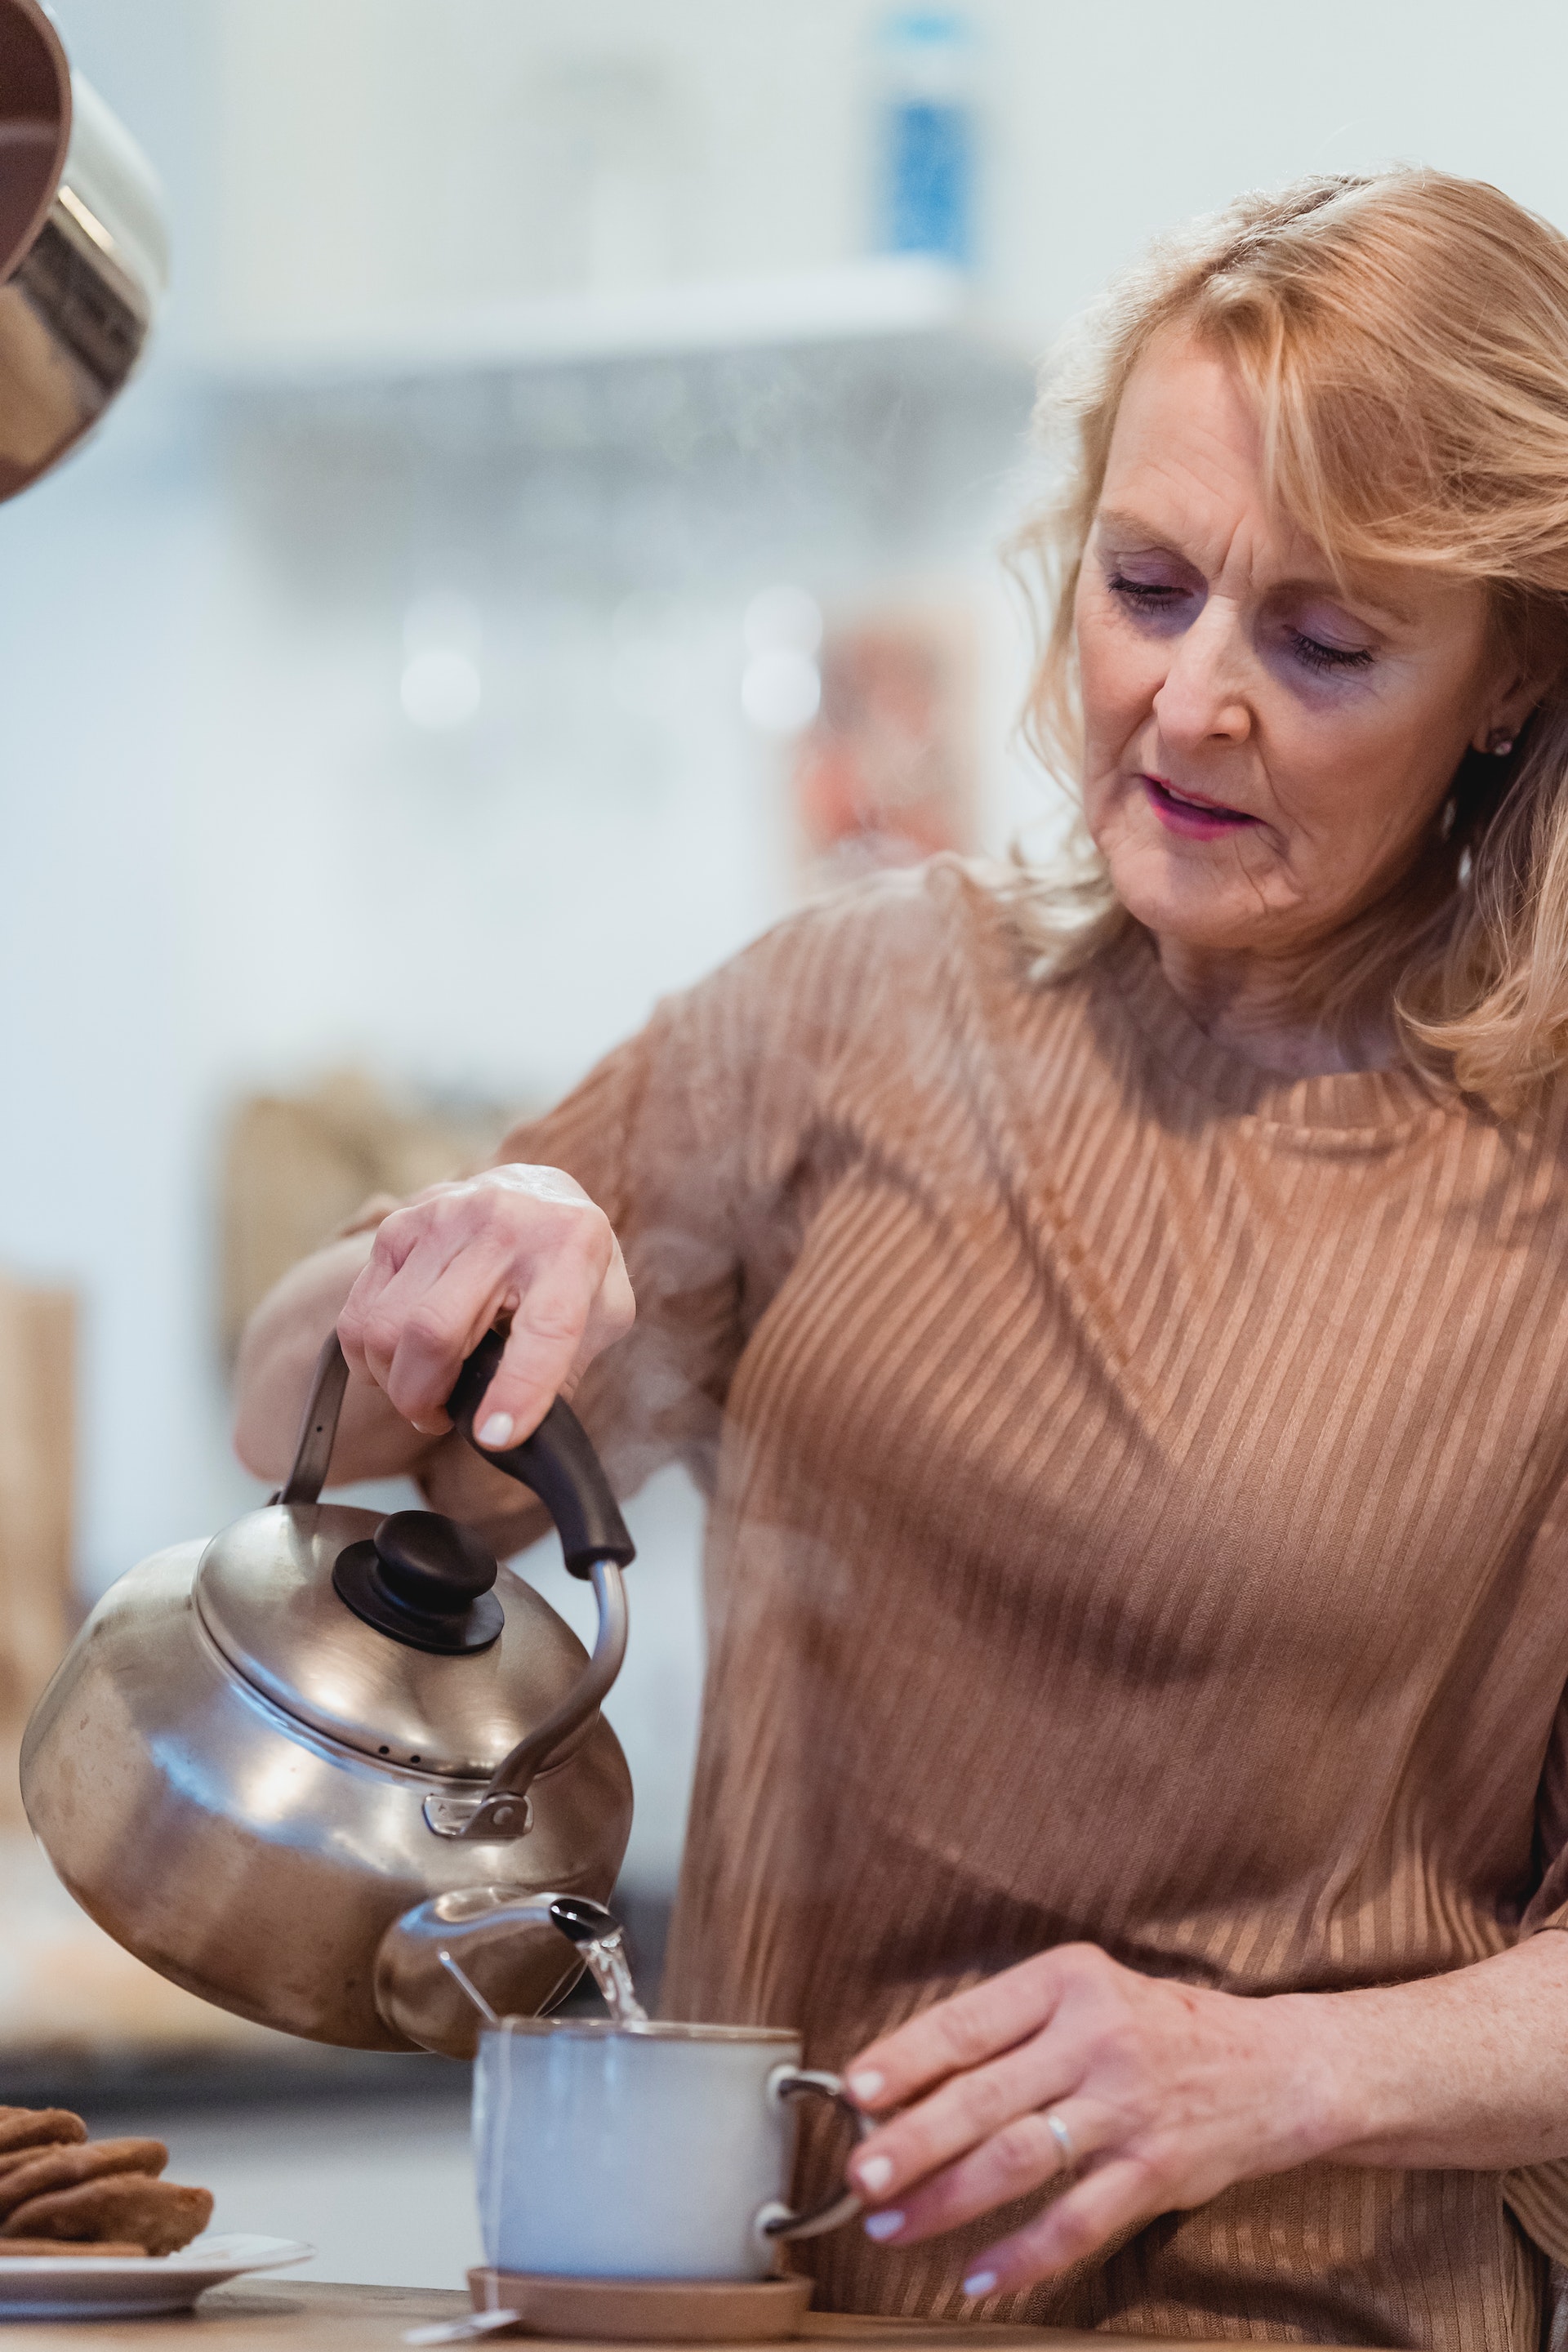 An older woman pouring water in a cup | Source: Pexels